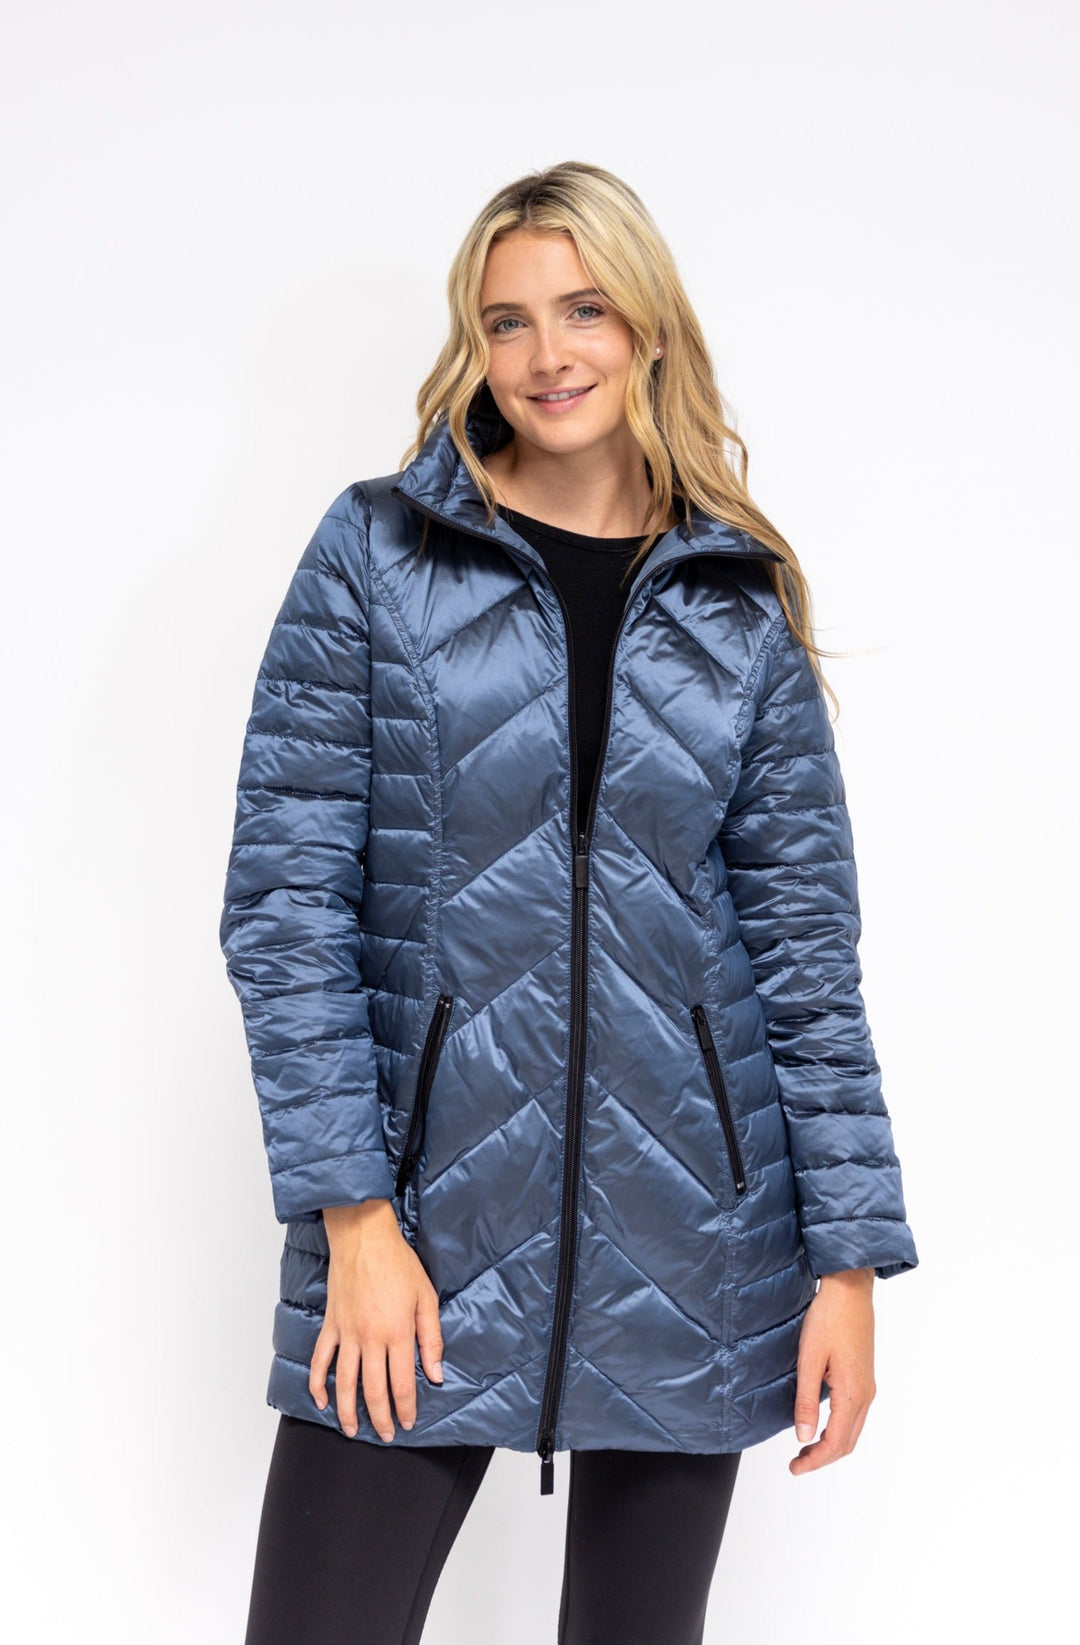 Chevron Quilted Longline Coat with Faux Fur Hood by Kaleidoscope